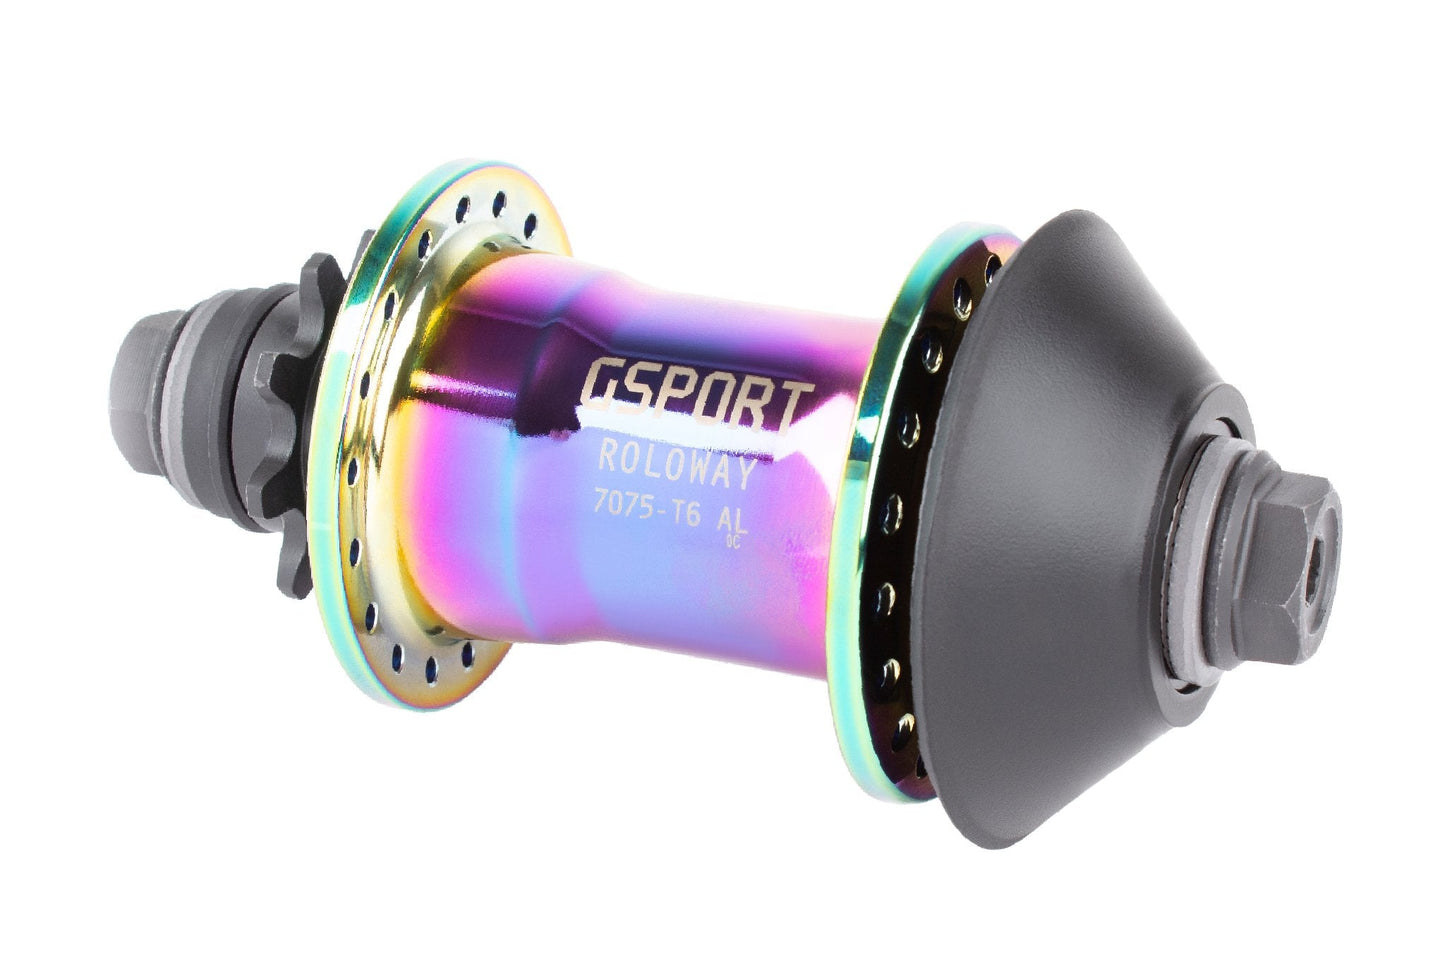 GSport Roloway Cassette Hub (Limited Edition Oil Slick)